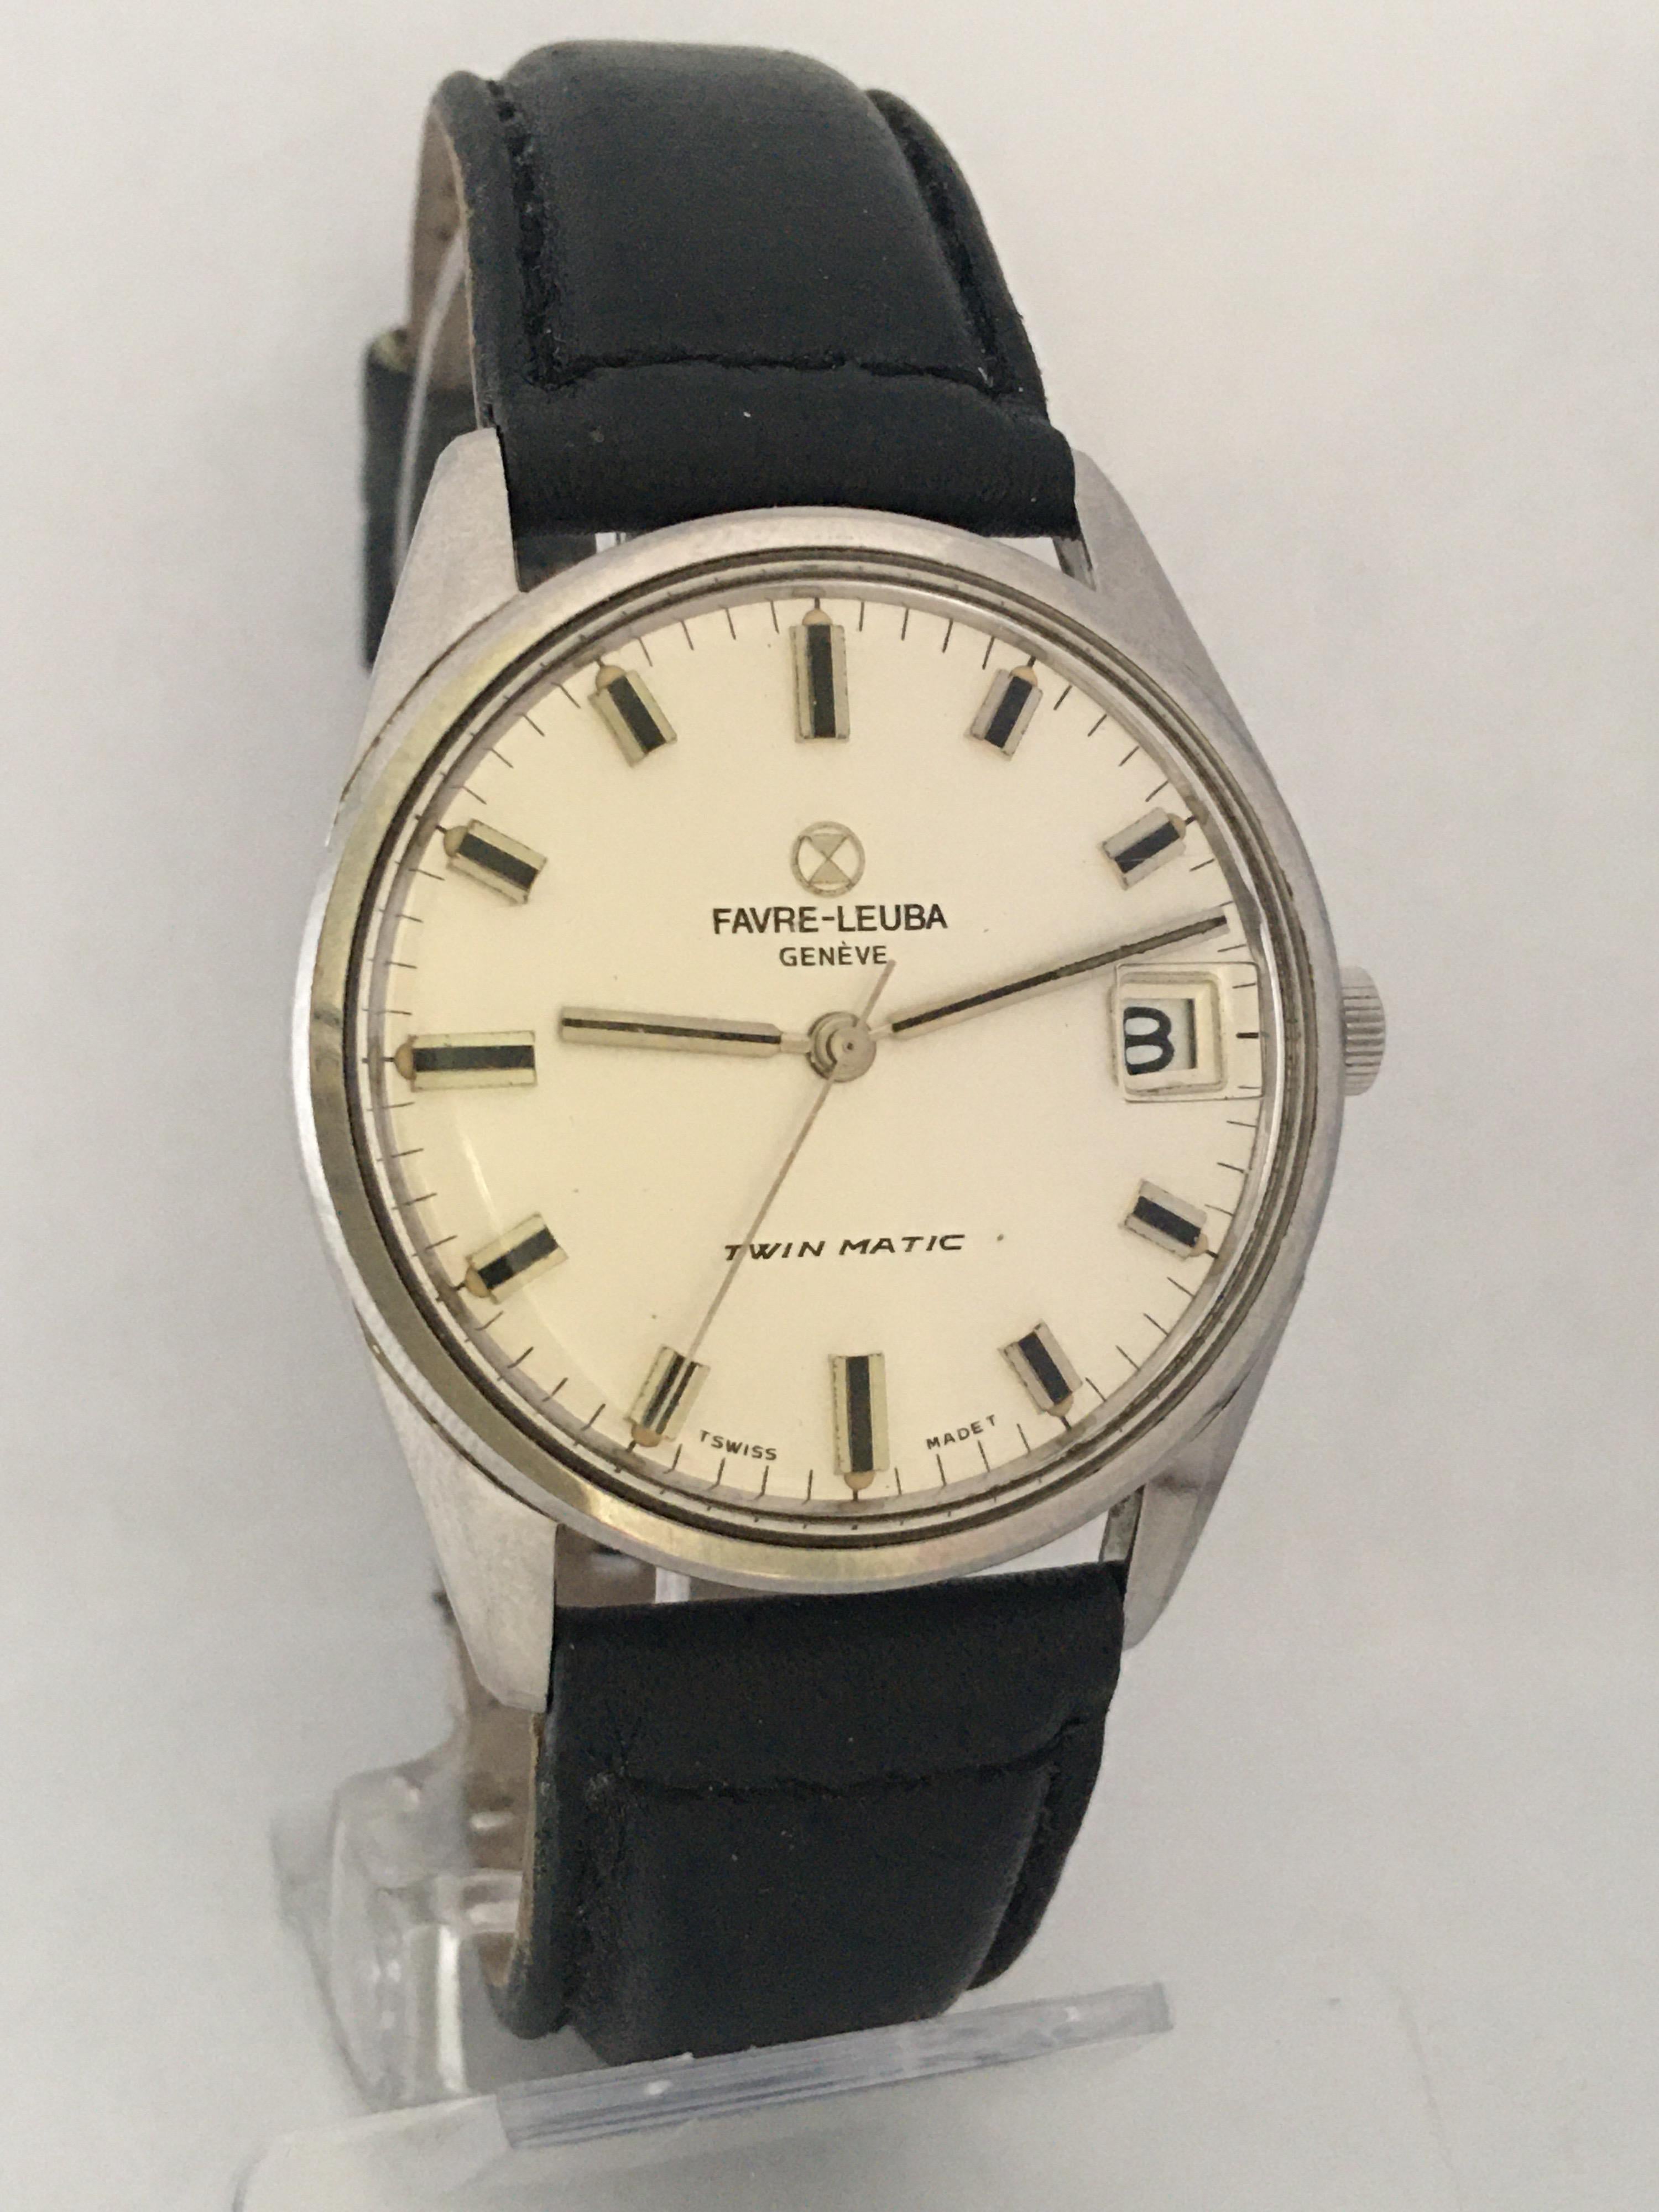 Vintage Stainless Steel Favre-Leuba Geneve Twin Matic Watch For Sale 5